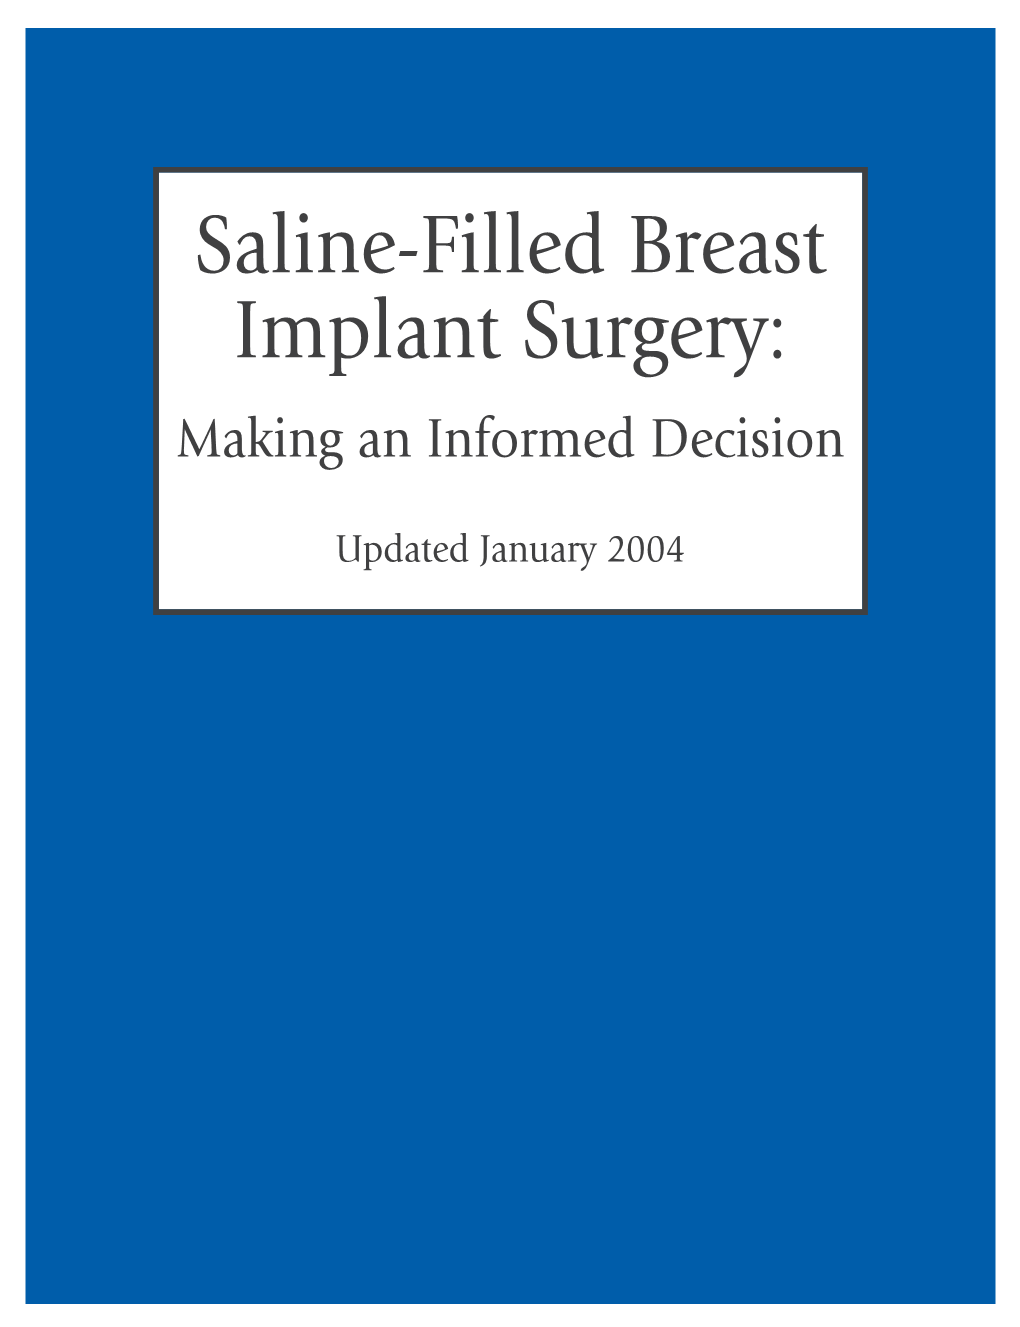 Saline-Filled Breast Implant Surgery: Making an Informed Decision